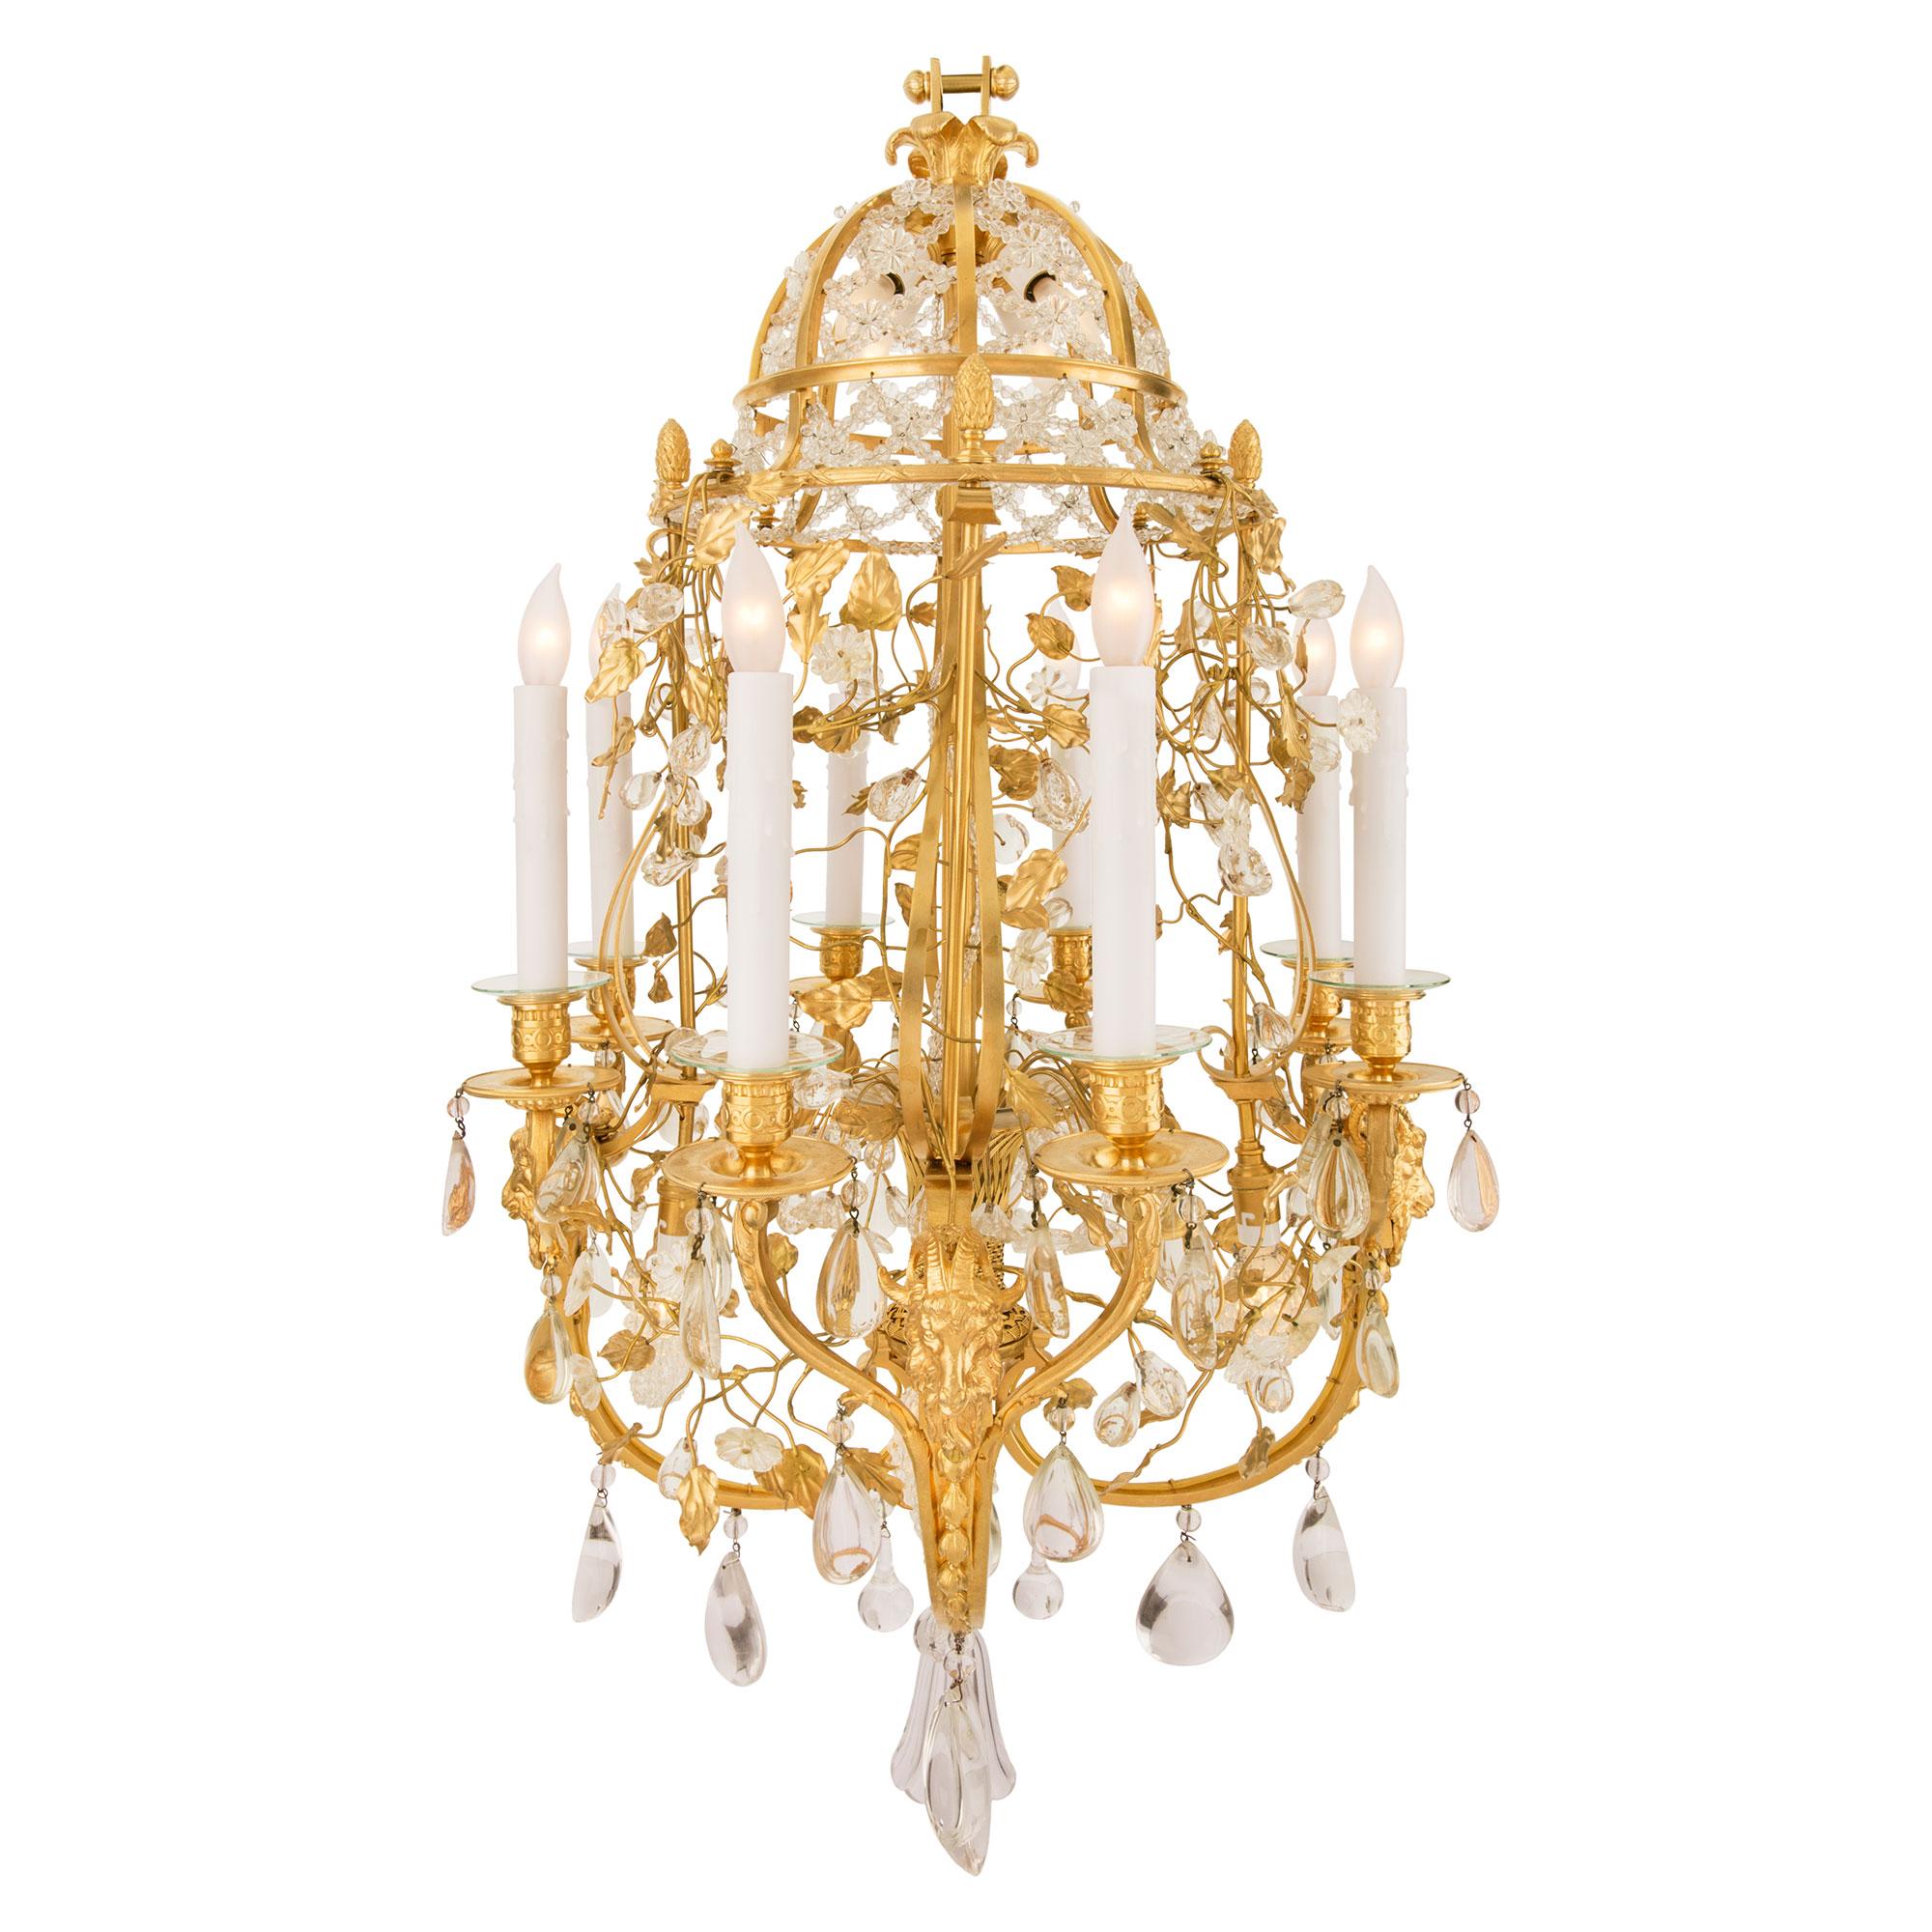 A sensational and most unique French 19th century Louis XVI st. Belle Époque period ormolu and Baccarat crystal birdcage shaped chandelier. The charming eight arm twelve light chandelier is centered by a beautiful bottom tulip shaped Baccarat